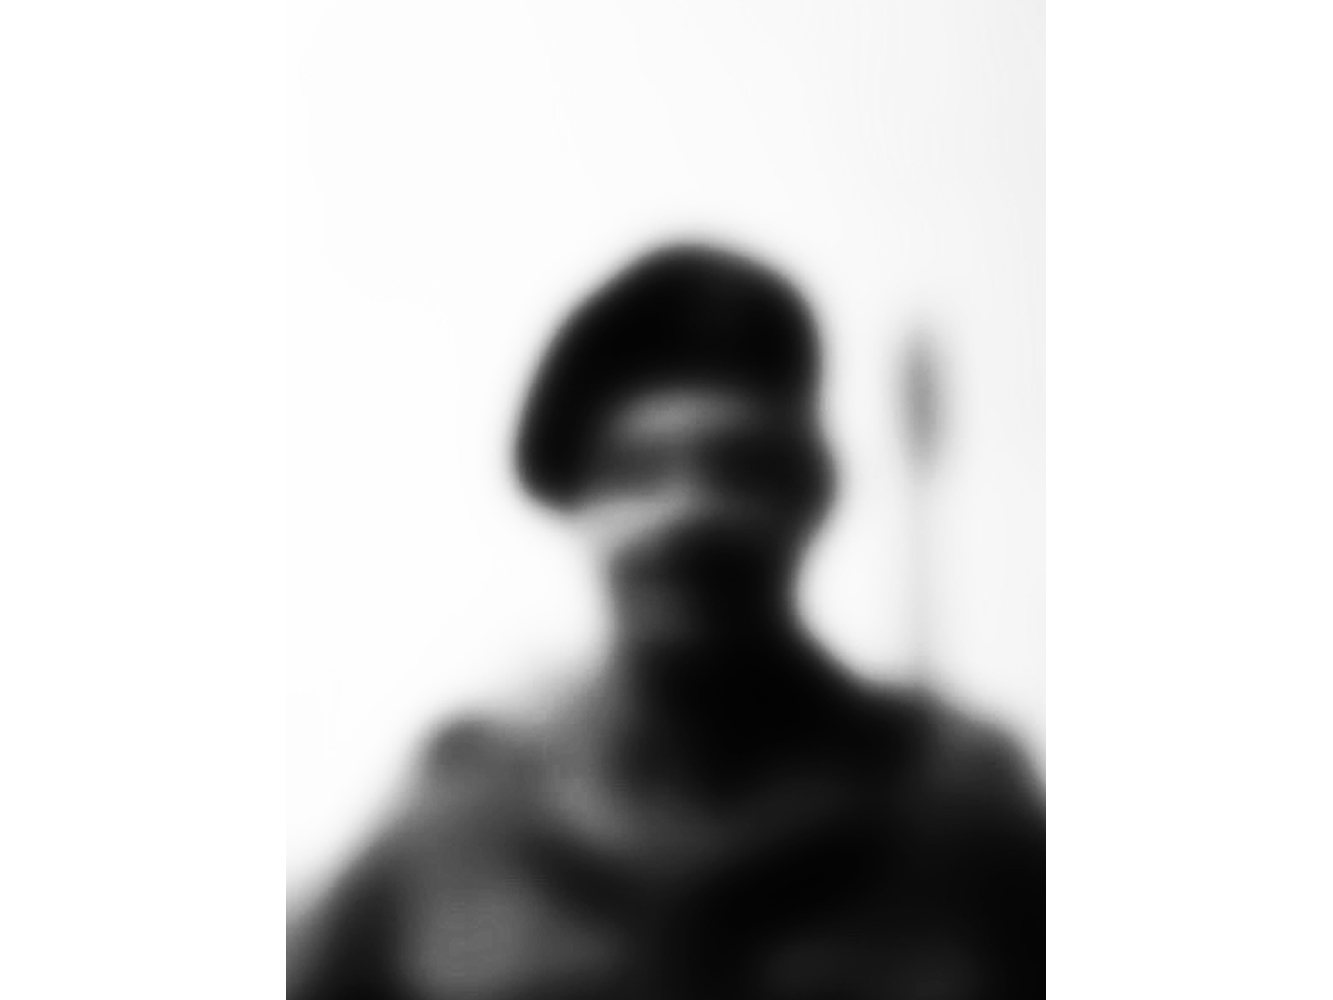 Blurred black and white photography of person wearing a hat